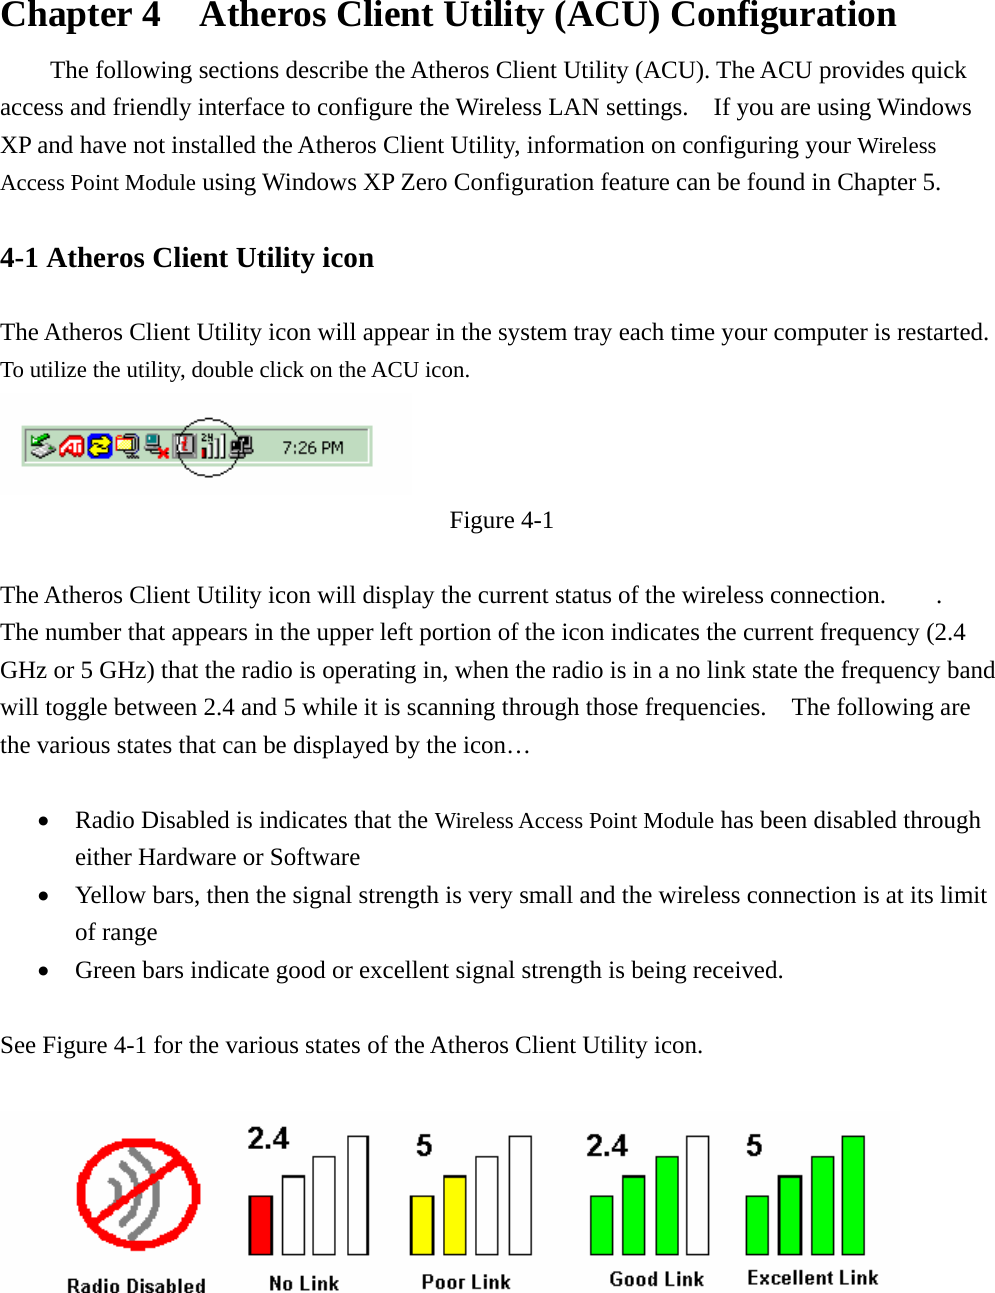  Chapter 4    Atheros Client Utility (ACU) Configuration The following sections describe the Atheros Client Utility (ACU). The ACU provides quick access and friendly interface to configure the Wireless LAN settings.  If you are using Windows XP and have not installed the Atheros Client Utility, information on configuring your Wireless Access Point Module using Windows XP Zero Configuration feature can be found in Chapter 5.    4-1 Atheros Client Utility icon    The Atheros Client Utility icon will appear in the system tray each time your computer is restarted.     To utilize the utility, double click on the ACU icon.  Figure 4-1  The Atheros Client Utility icon will display the current status of the wireless connection.    .  The number that appears in the upper left portion of the icon indicates the current frequency (2.4 GHz or 5 GHz) that the radio is operating in, when the radio is in a no link state the frequency band will toggle between 2.4 and 5 while it is scanning through those frequencies.    The following are the various states that can be displayed by the icon…  • Radio Disabled is indicates that the Wireless Access Point Module has been disabled through either Hardware or Software • Yellow bars, then the signal strength is very small and the wireless connection is at its limit of range • Green bars indicate good or excellent signal strength is being received.    See Figure 4-1 for the various states of the Atheros Client Utility icon.    